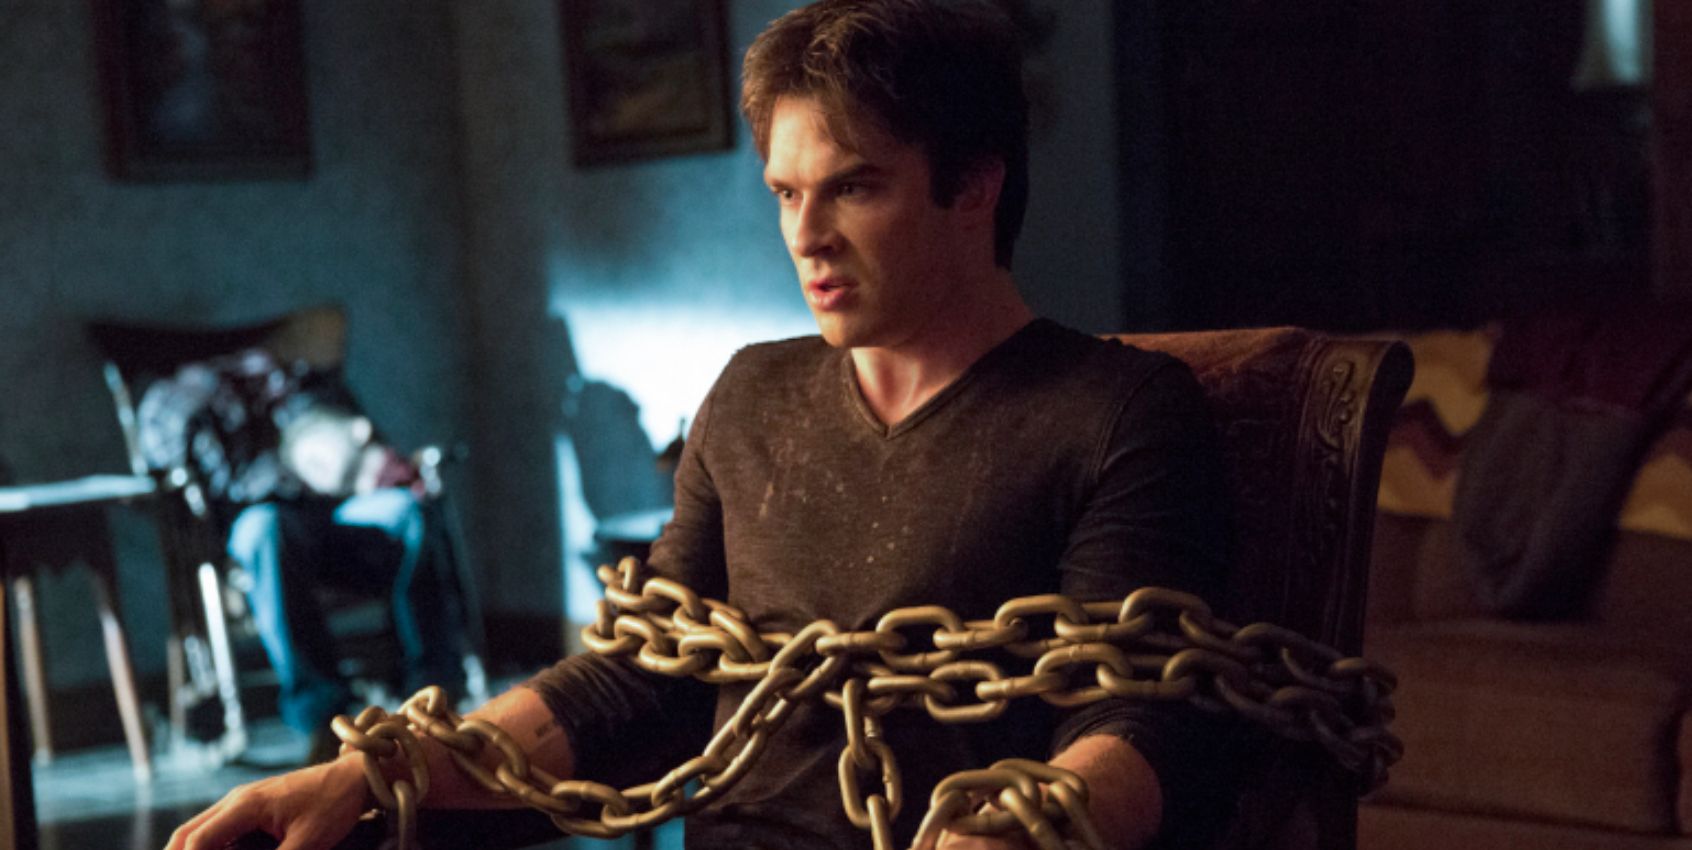 Damon in chains in The Vampire Diaries episode No Exit